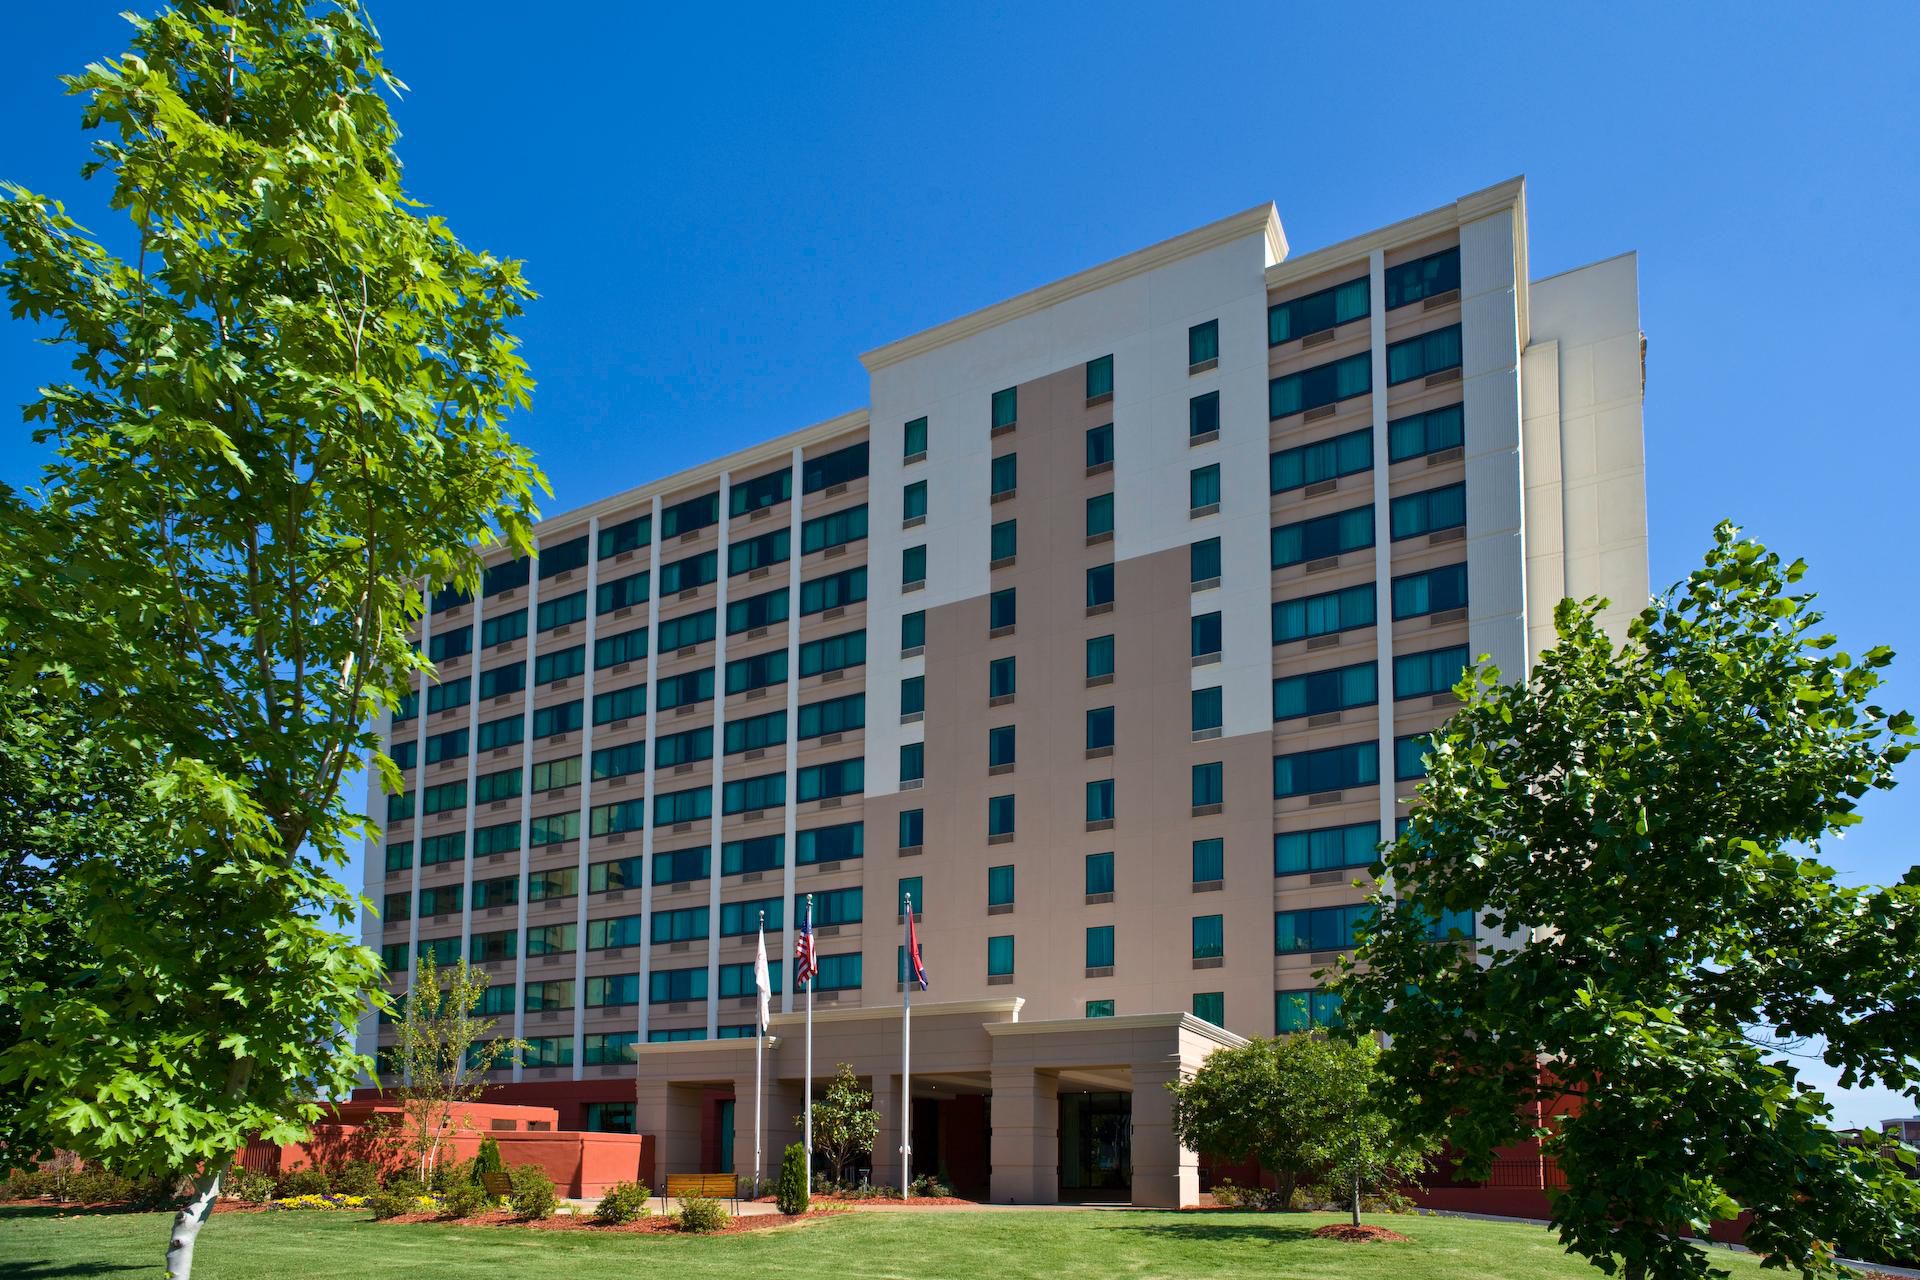 Stay with Crowne Plaza Memphis Downtown in the heart of Memphis.